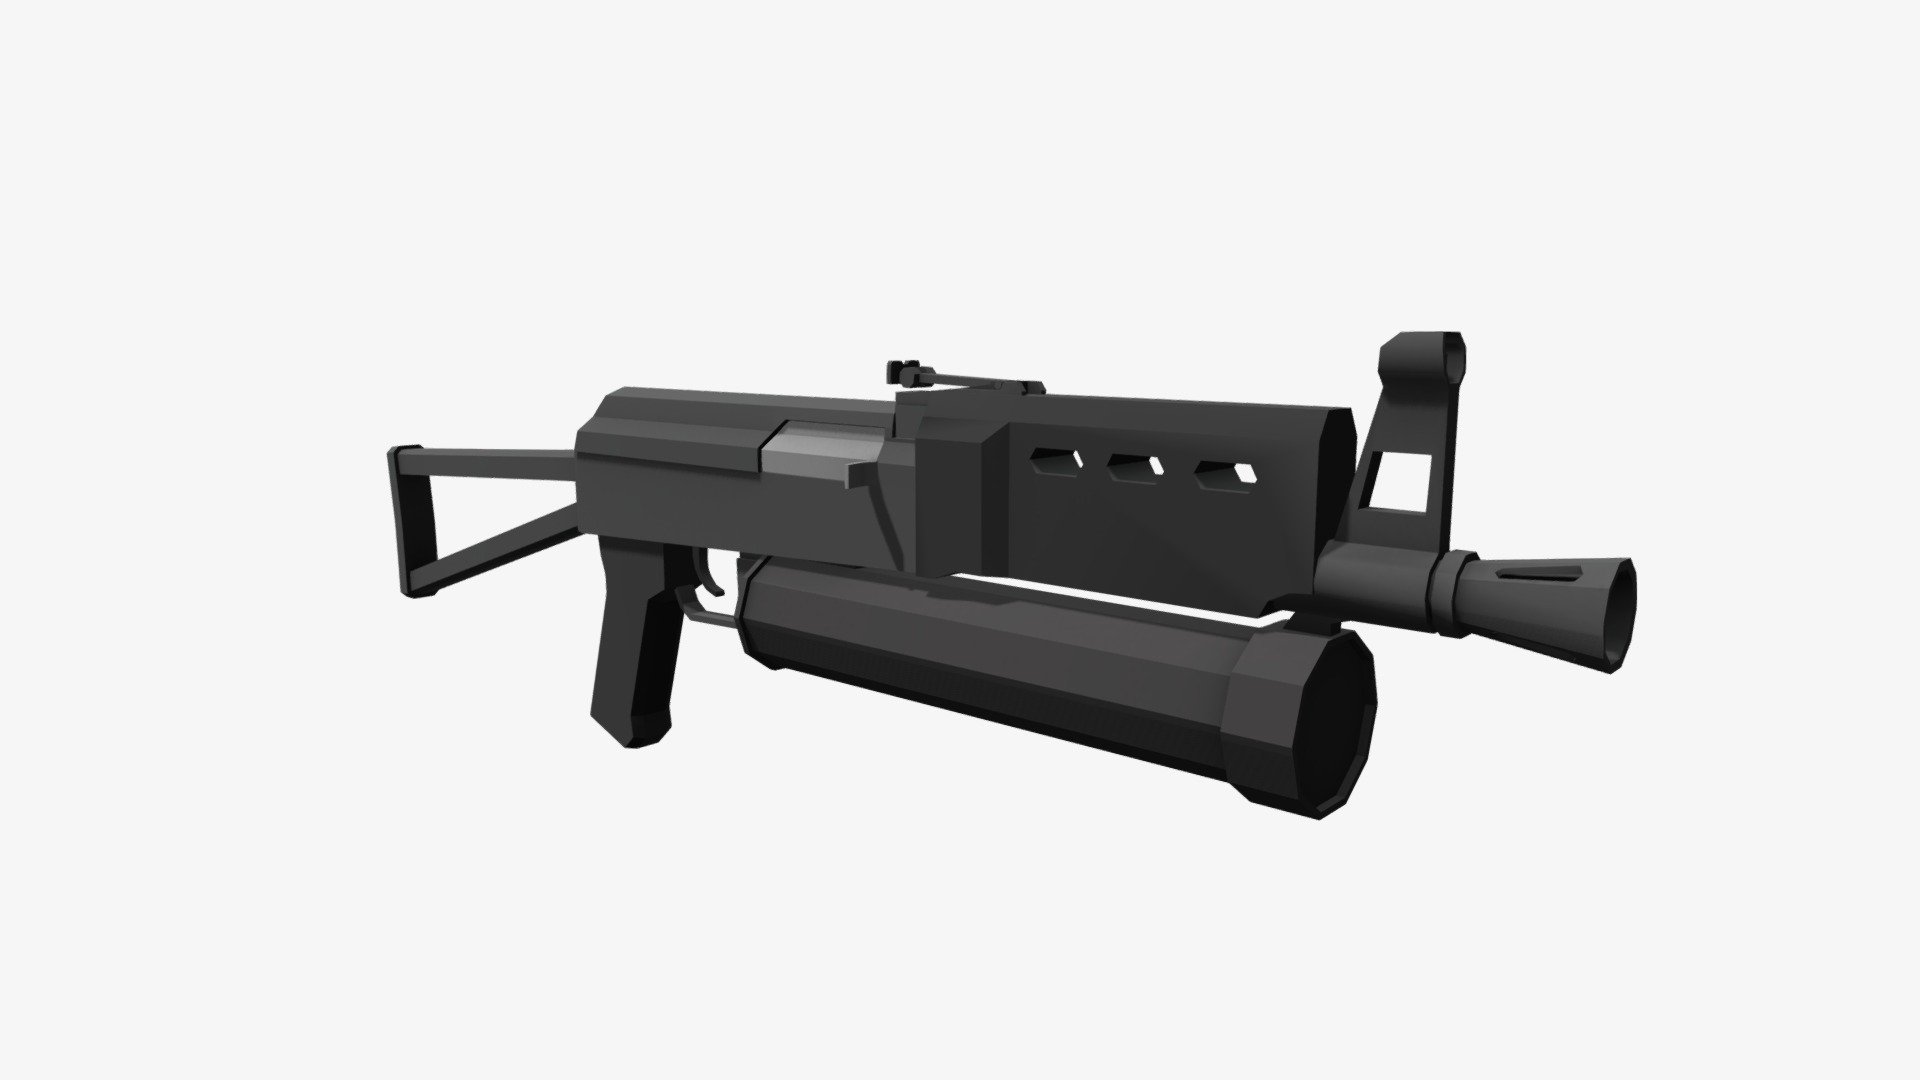 Low Poly PP-19 Bizon - 3D model by samanthacford [f74380d] - Sketchfab